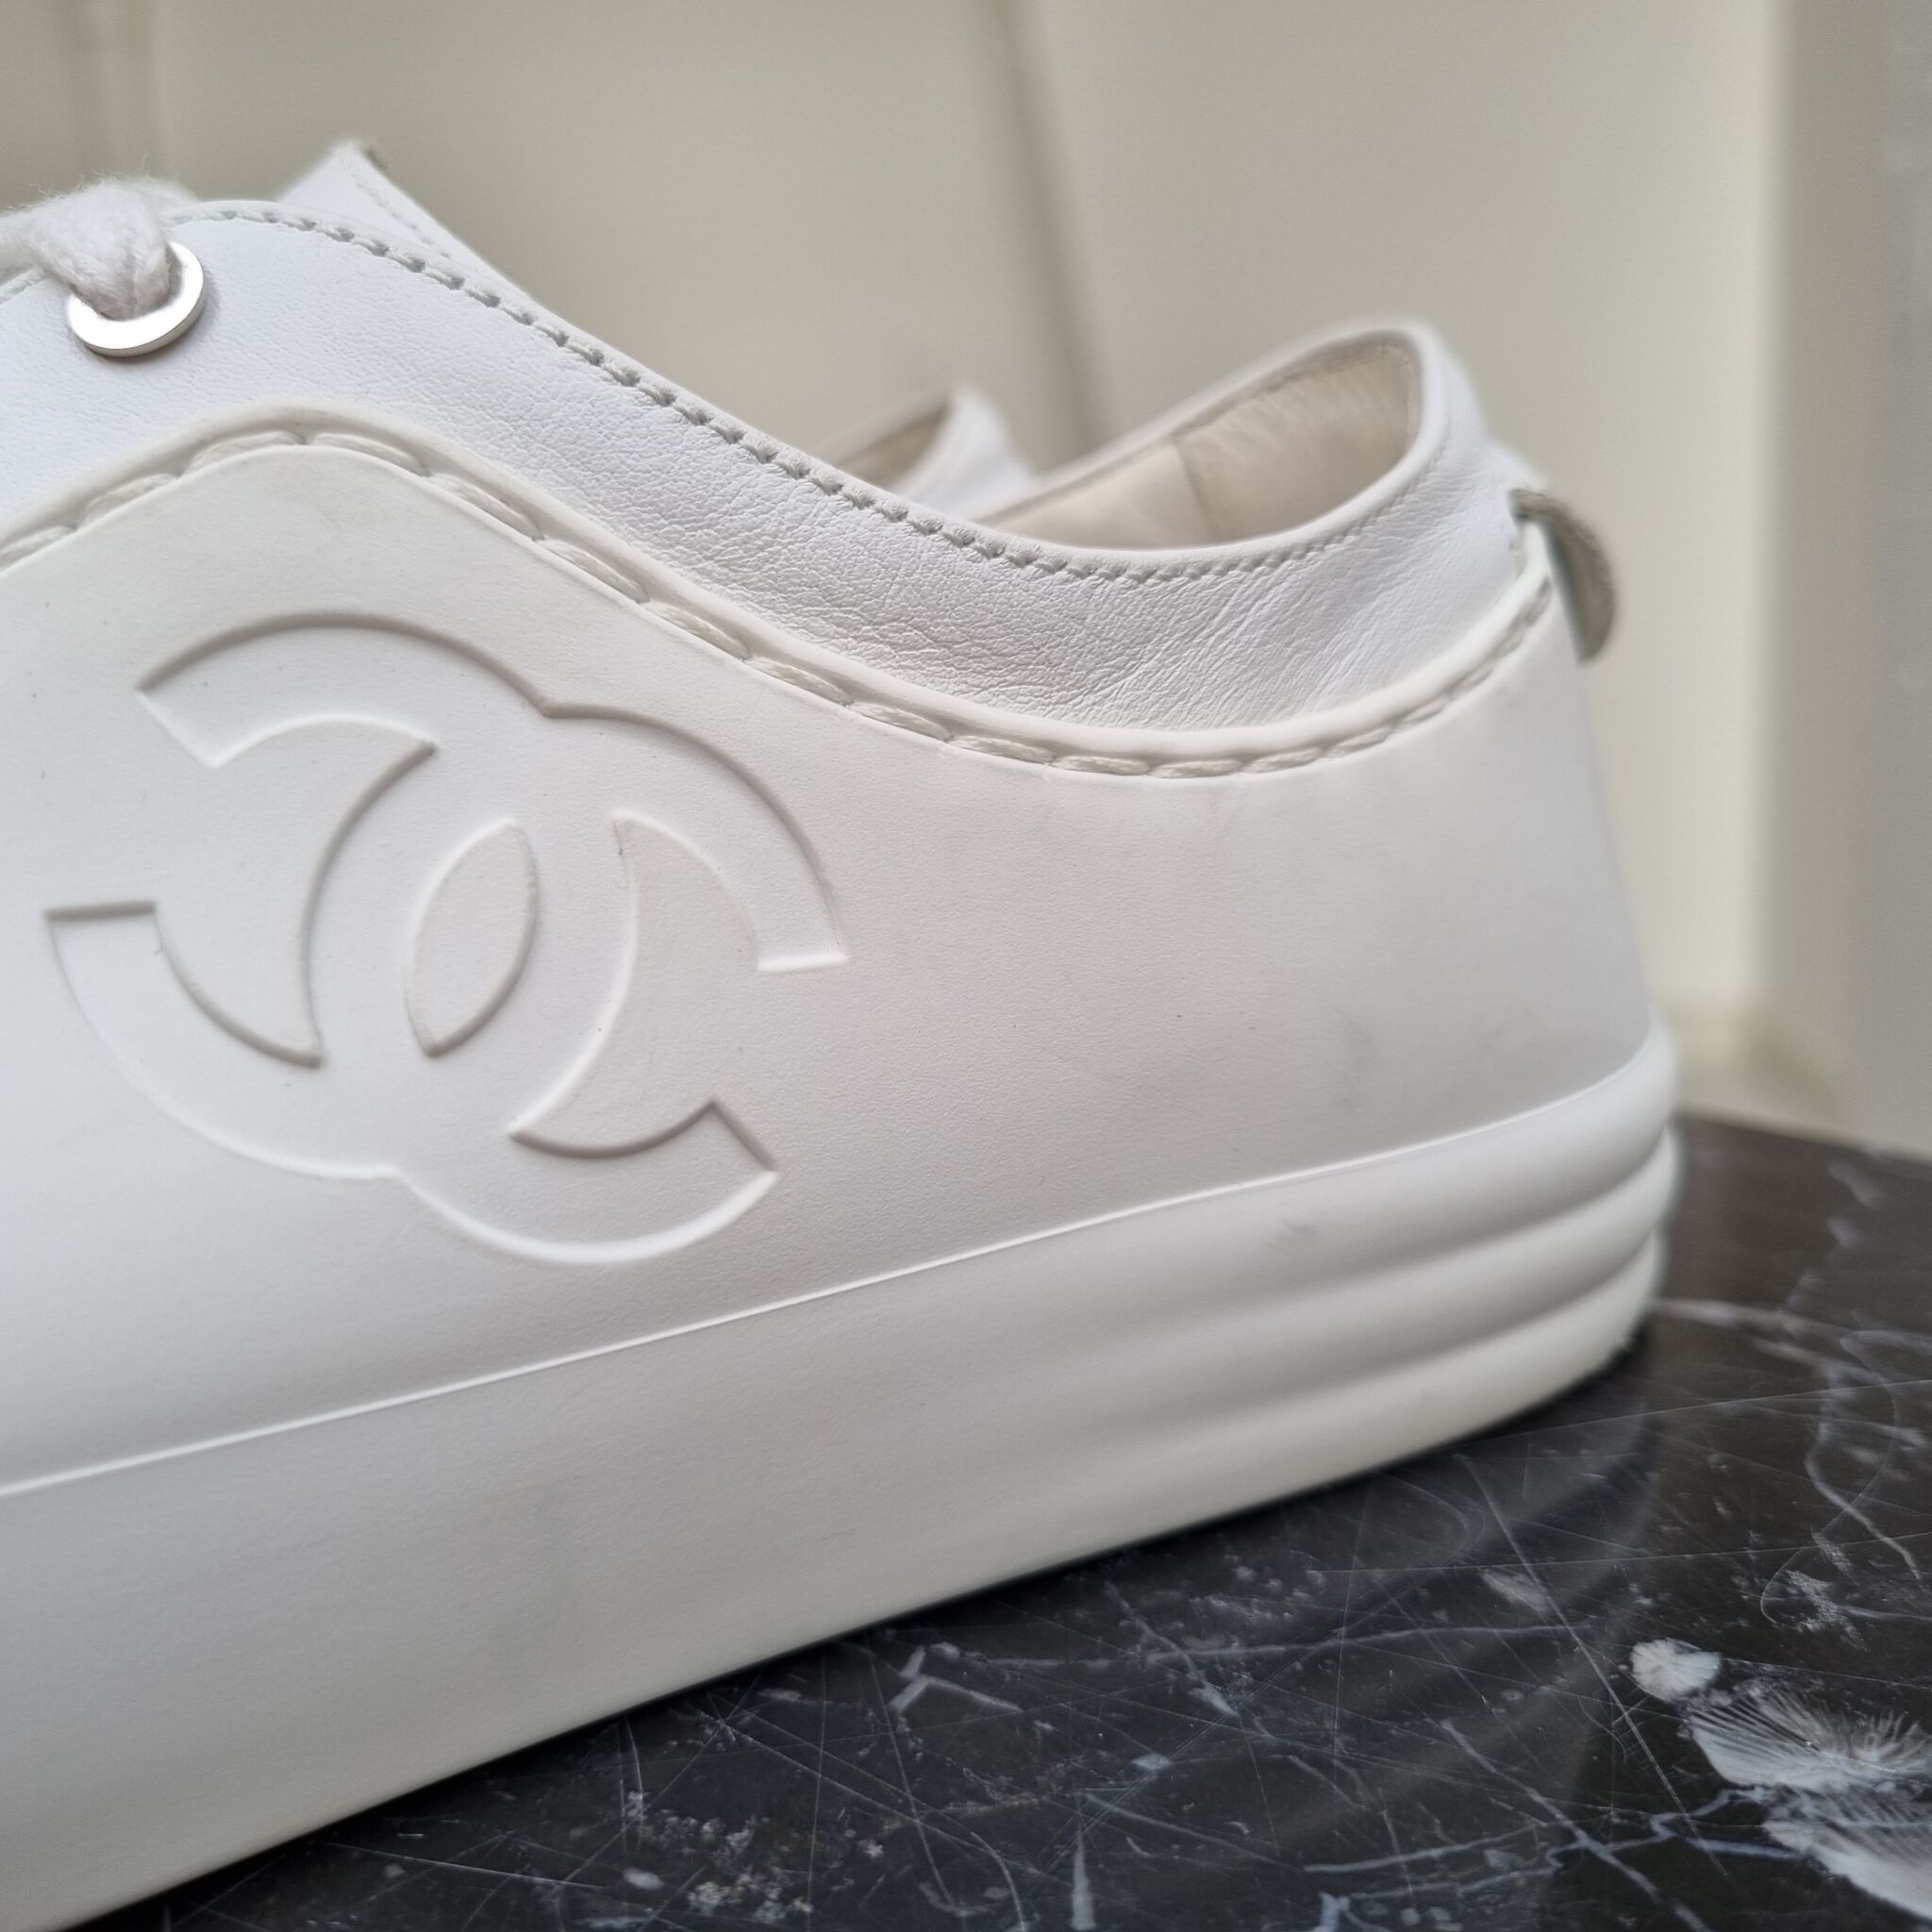 Chanel Sneakers White Leather w Black Leather CC To Cap 38  8 New w   Mightychic